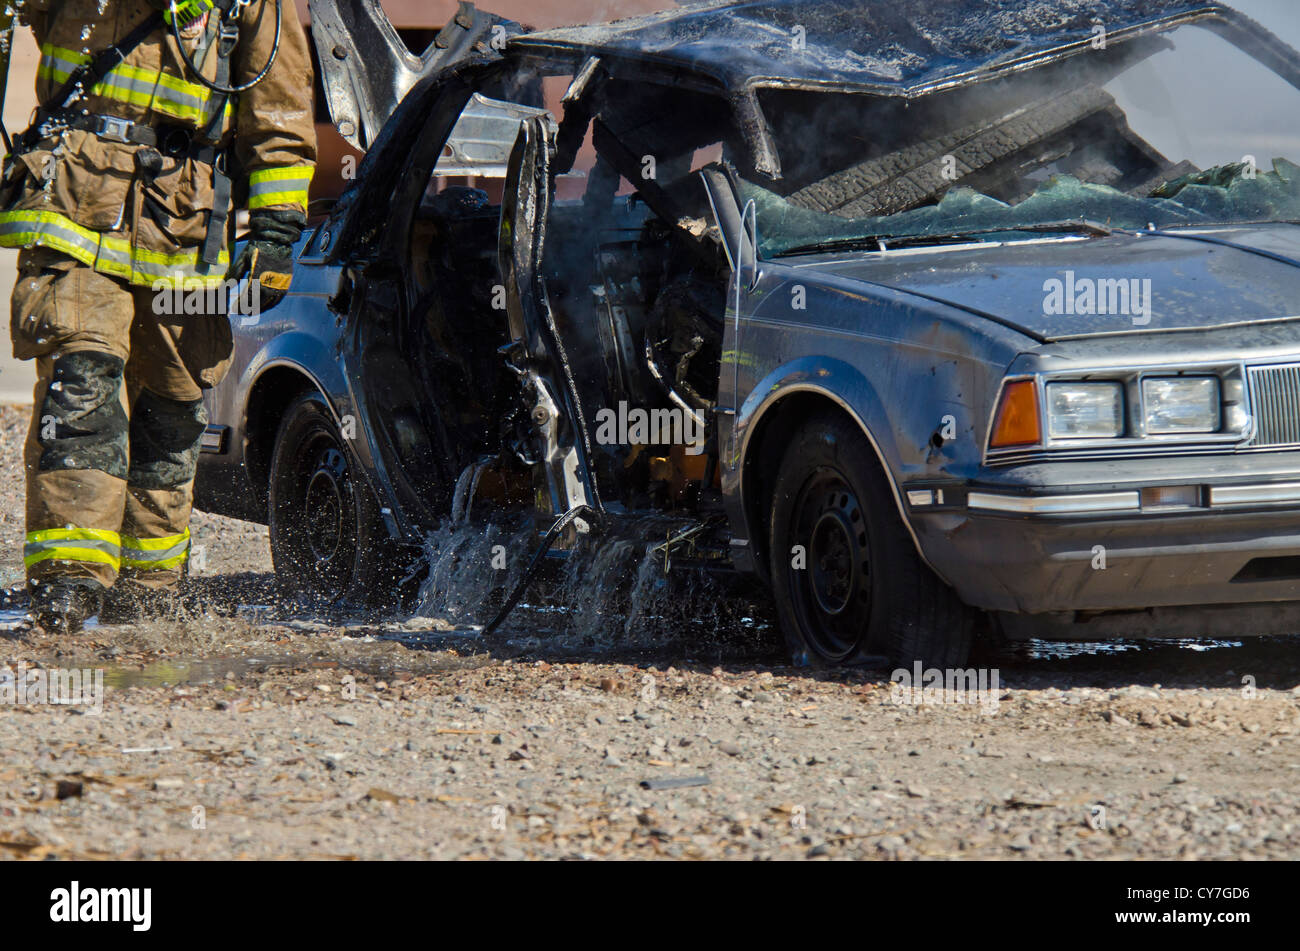 Car that was on fire has been taken care of by firemen. Arizona. Stock Photo